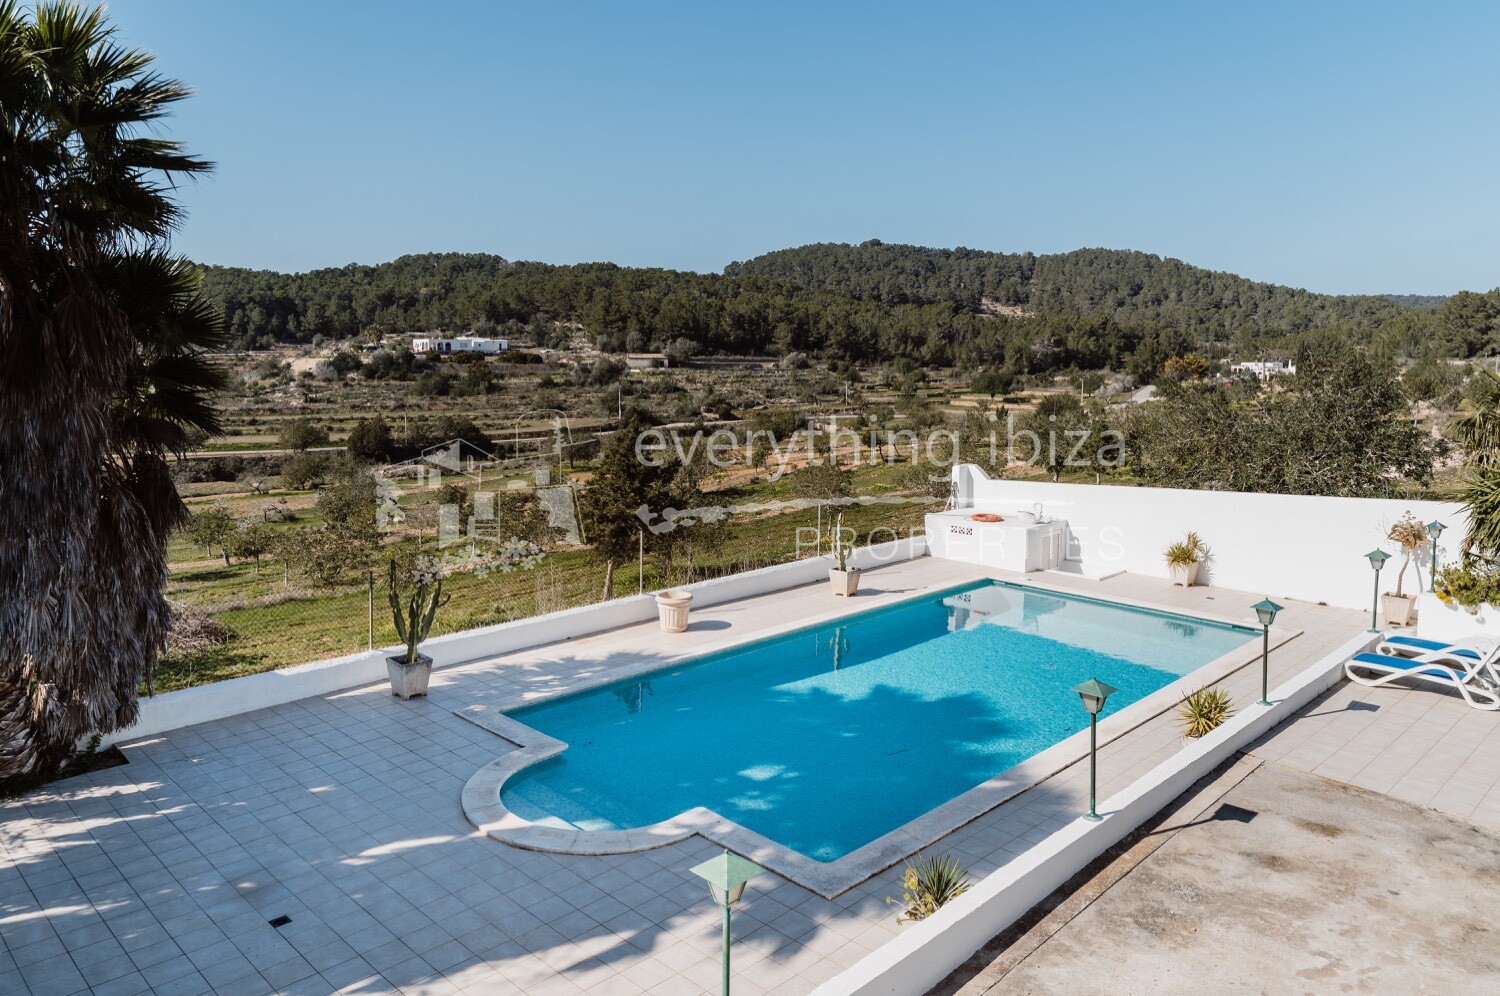 Traditional Villa in the Heart of the Ibiza Countryside, ref. 1406, for sale in Ibiza by everything ibiza Properties